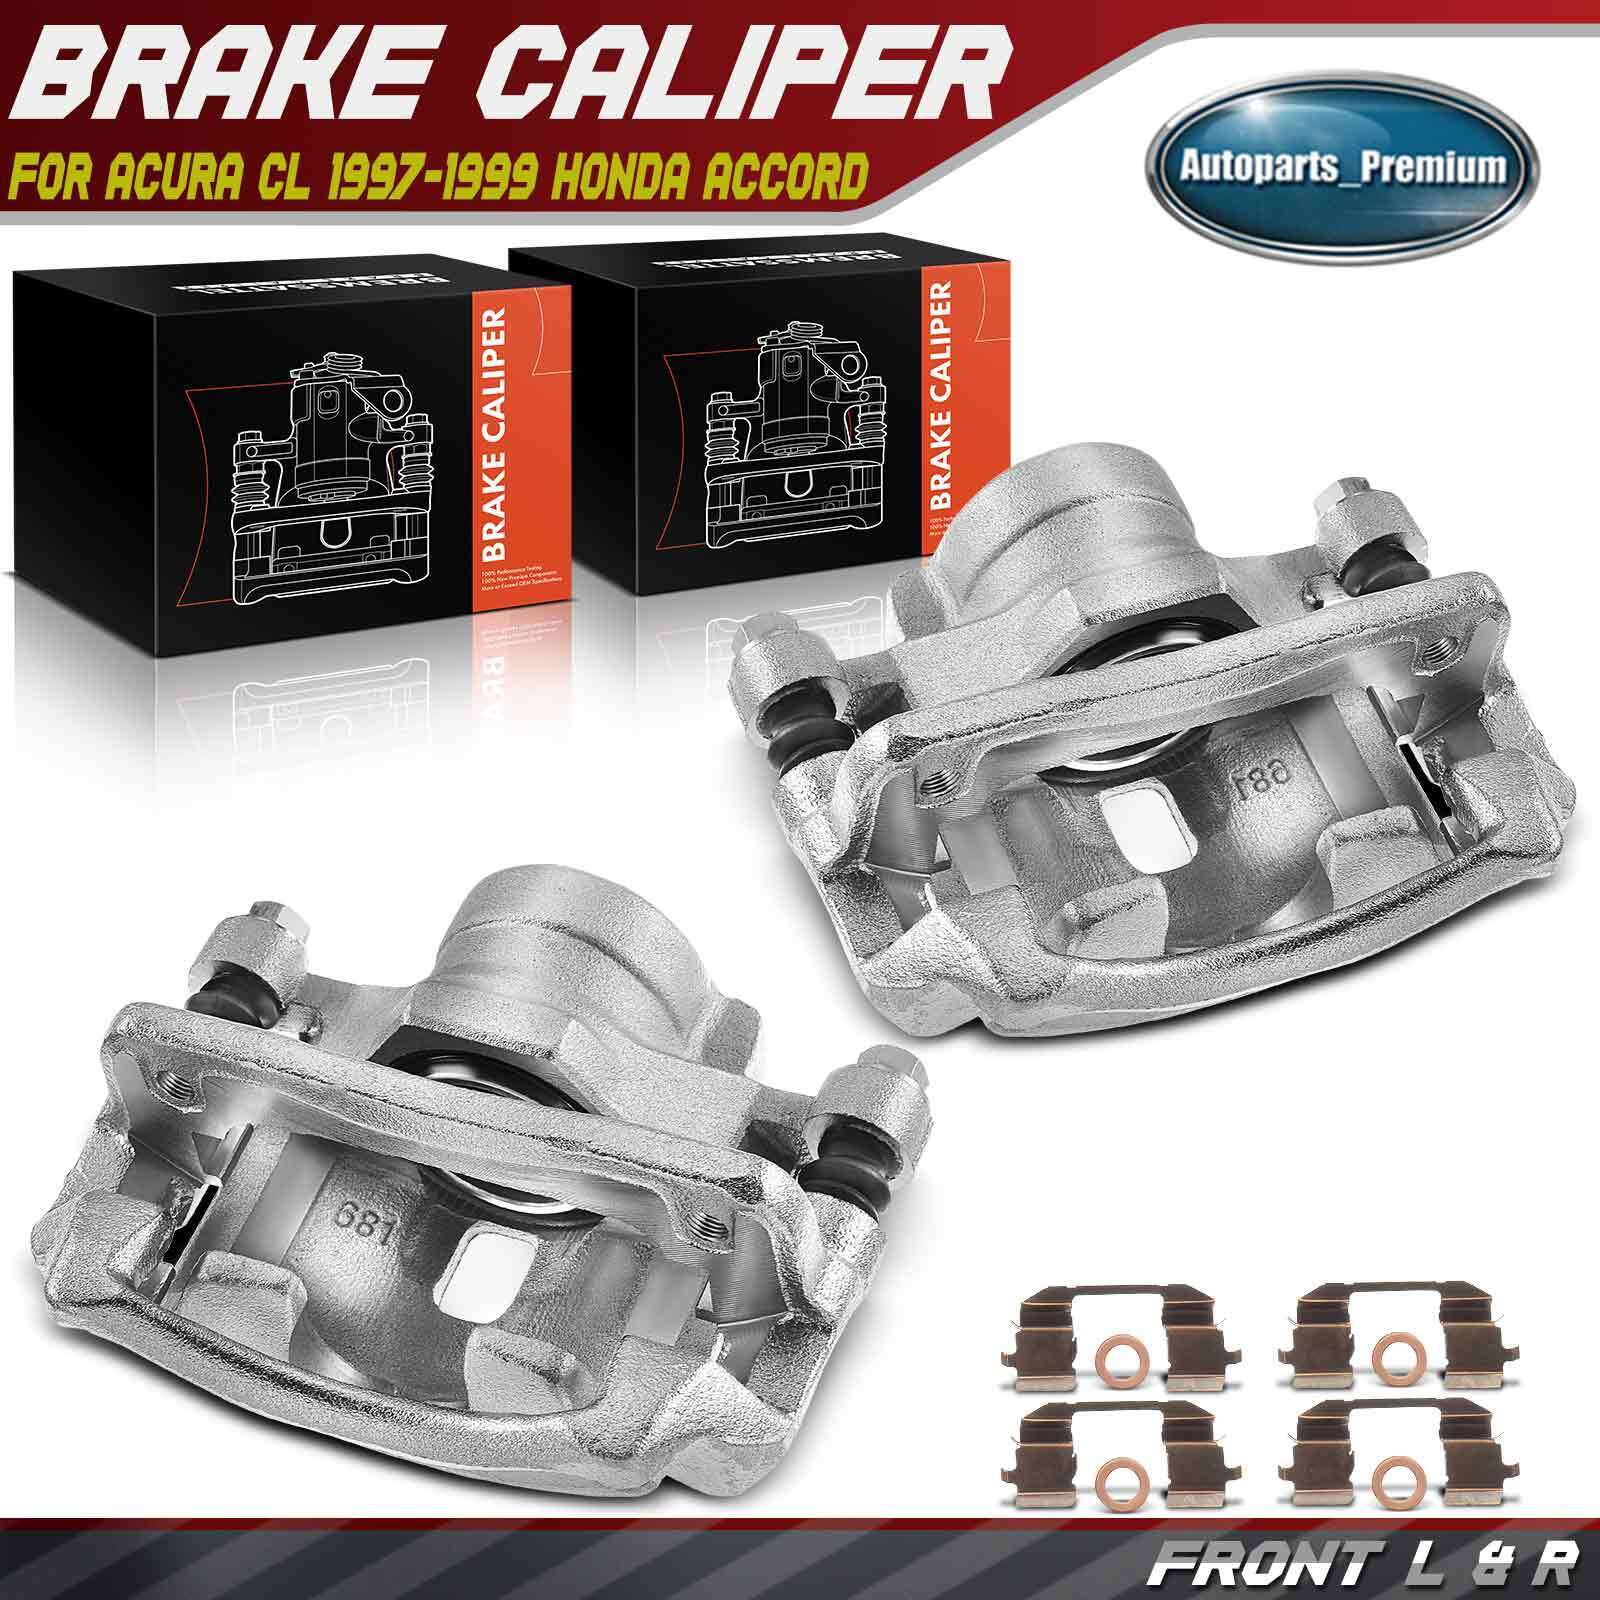 2x Disc Brake Caliper with Bracket for Acura CL Honda Accord Front Left & Right